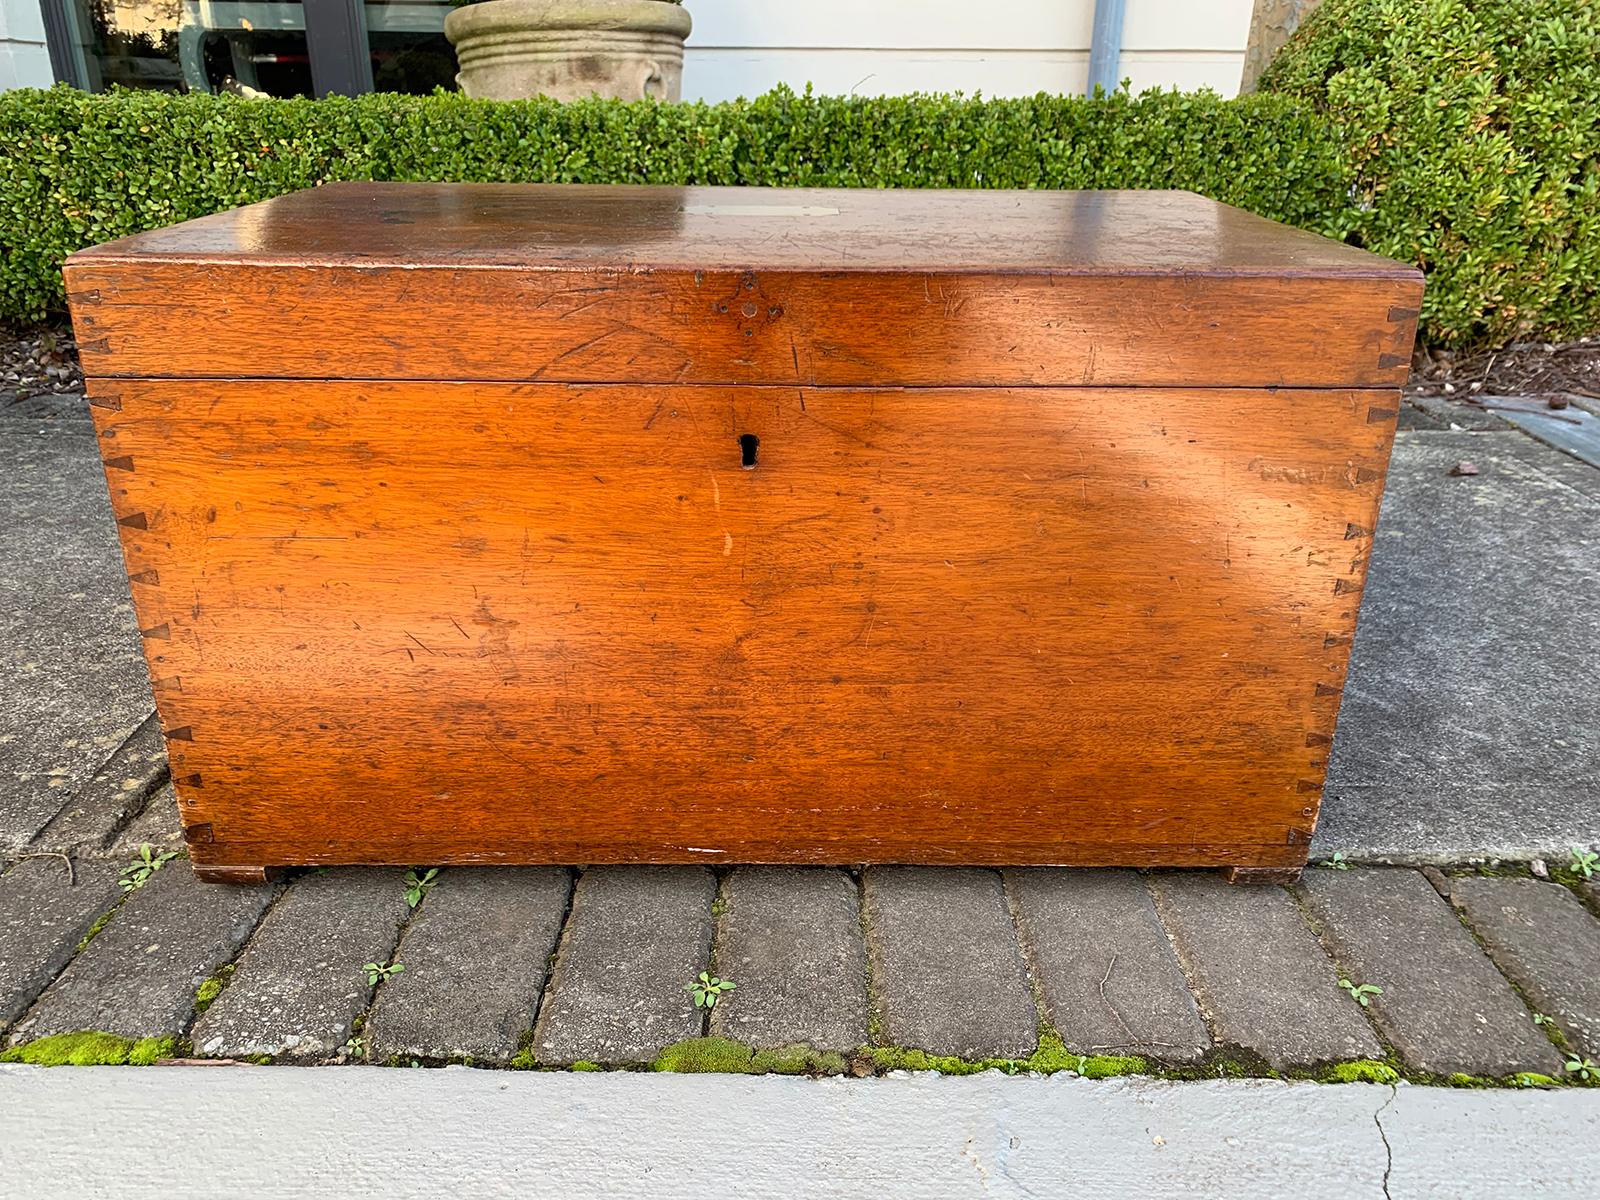 19th century camphor wood sea captain's trunk with tray insert.